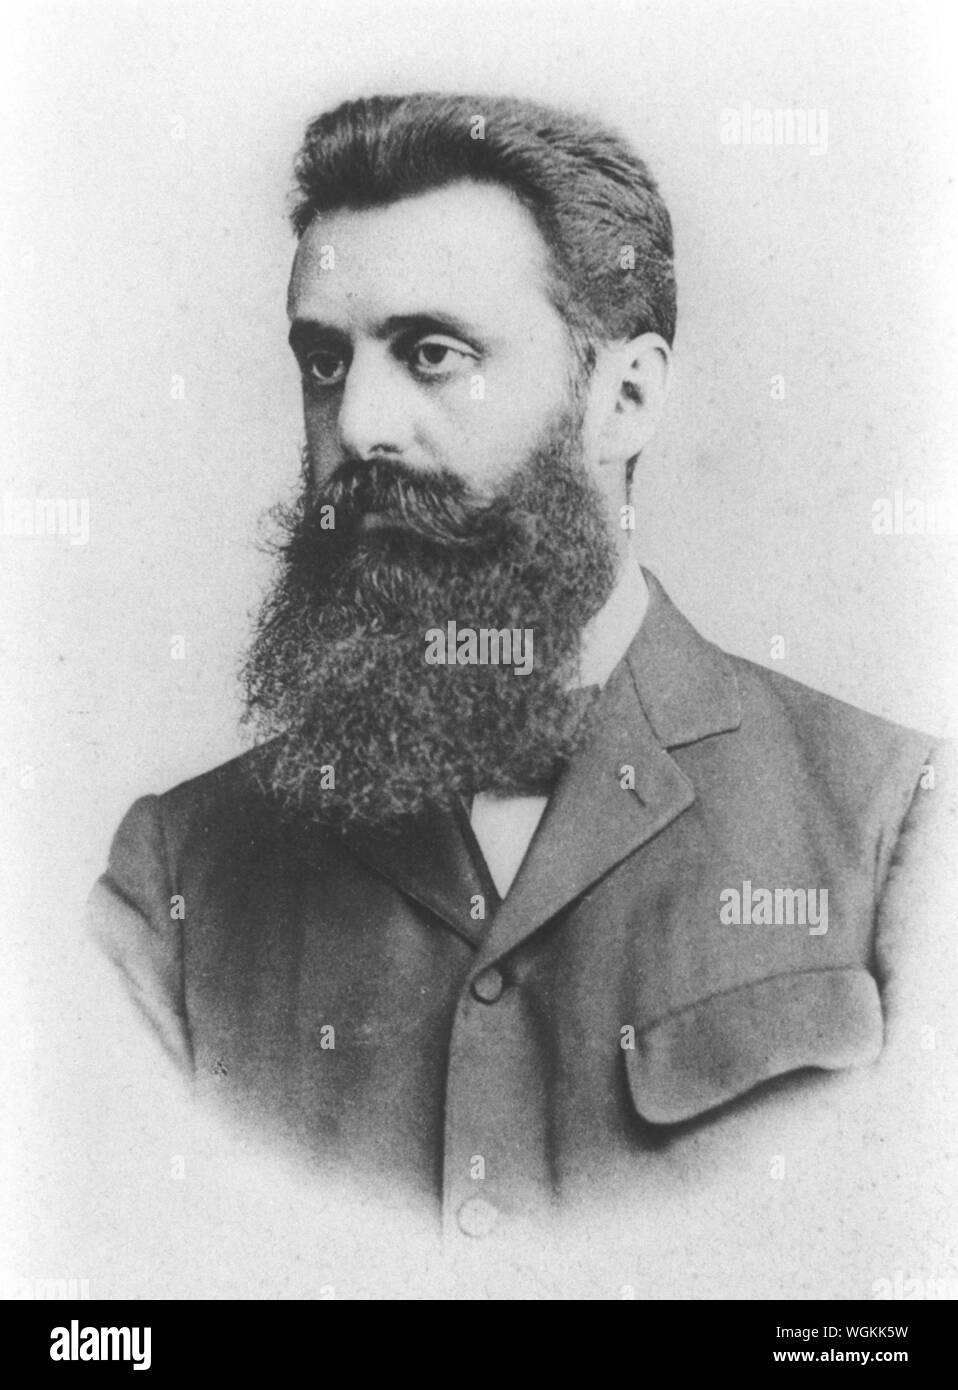 Theodor Herzl, Theodor Herzl (1860 – 1904) Jewish Austro-Hungarian journalist, playwright, political activist, and writer who was the father of modern political Zionism. Stock Photo